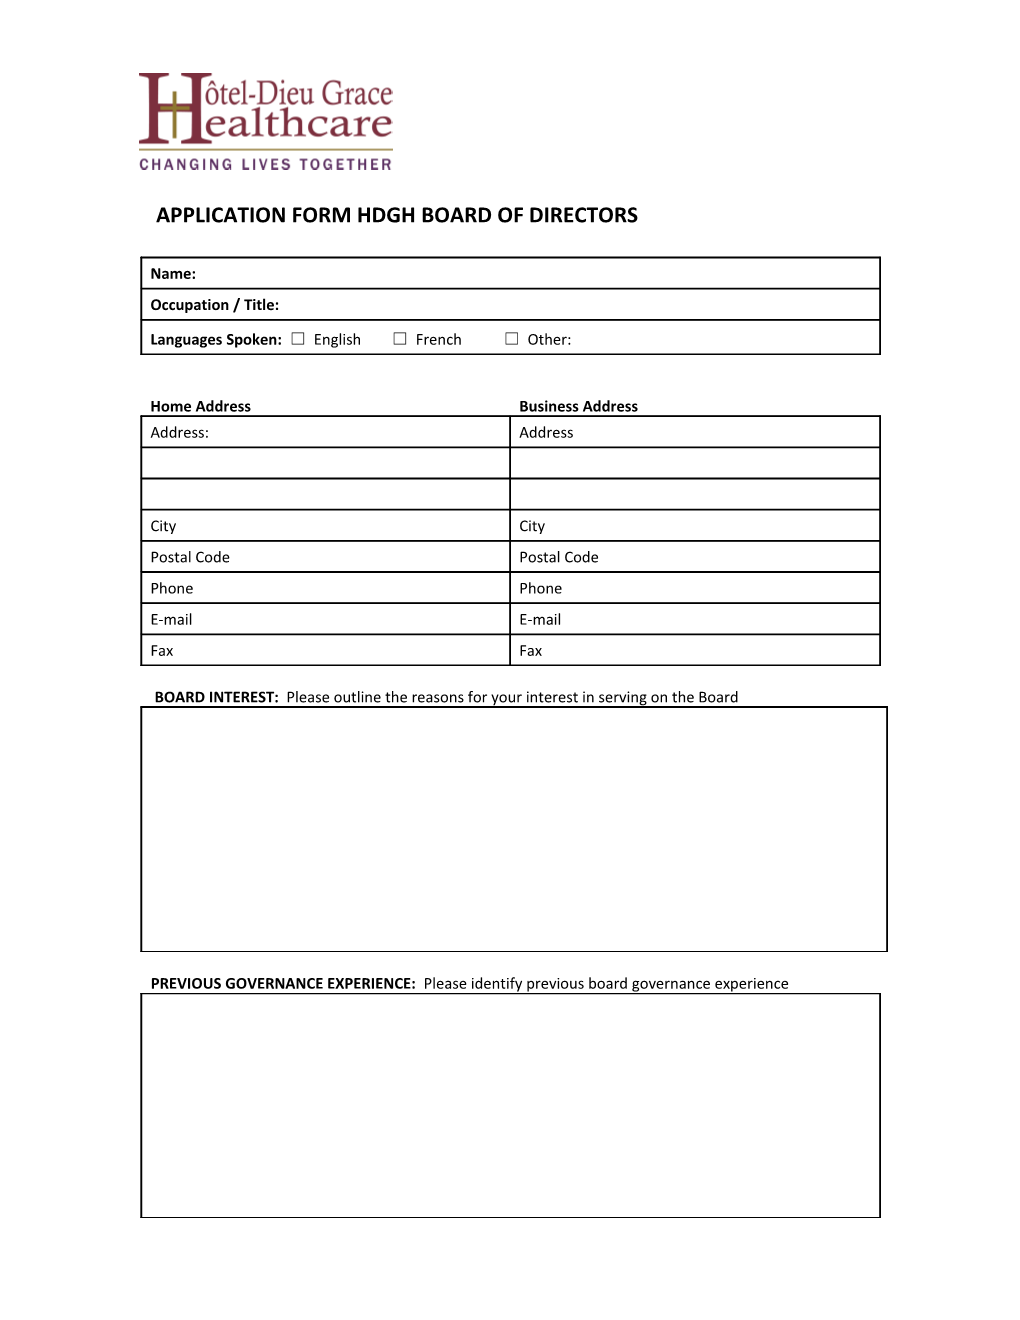 Application Form Hdgh Board of Directors